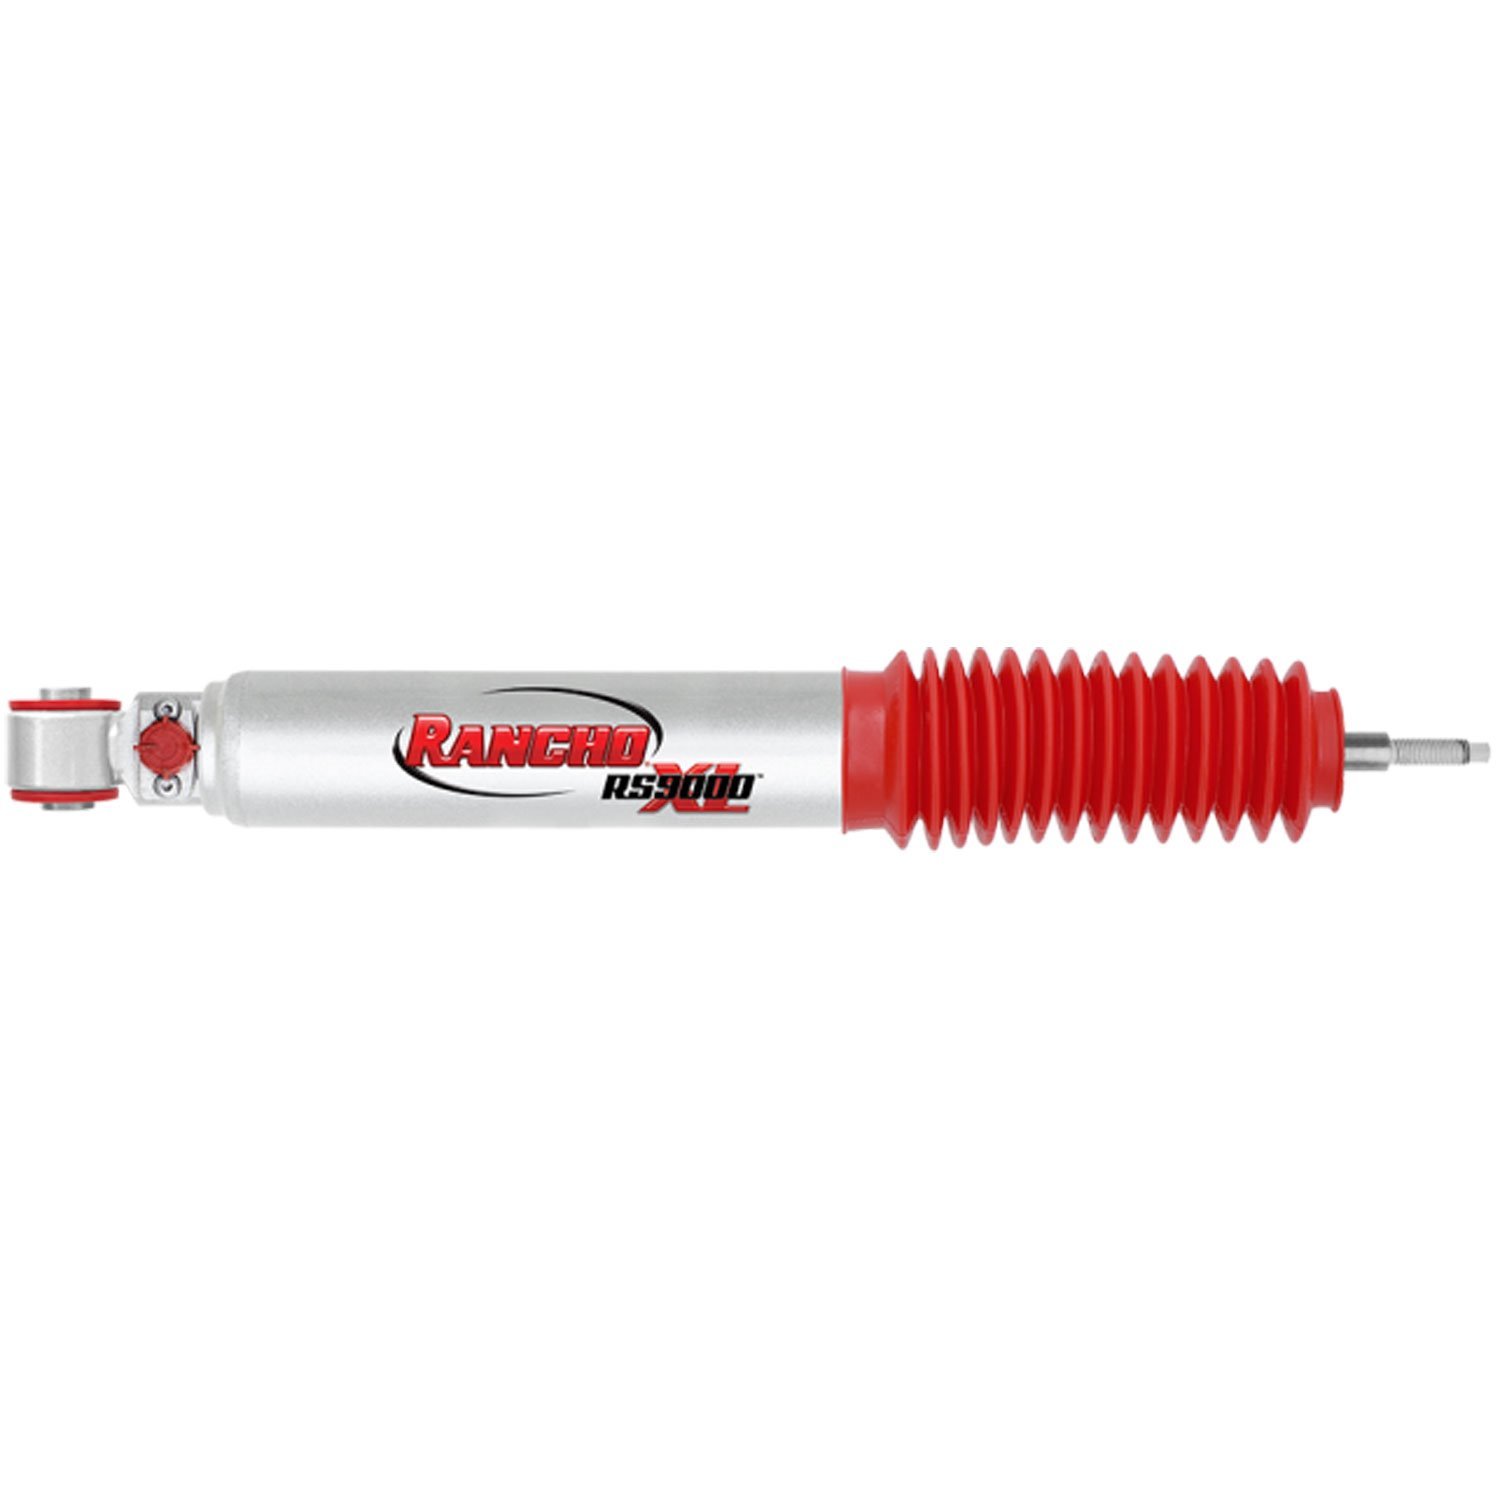 RS9000XL Rear Shock Absorber Fits Fullsize Pickup and SUVs